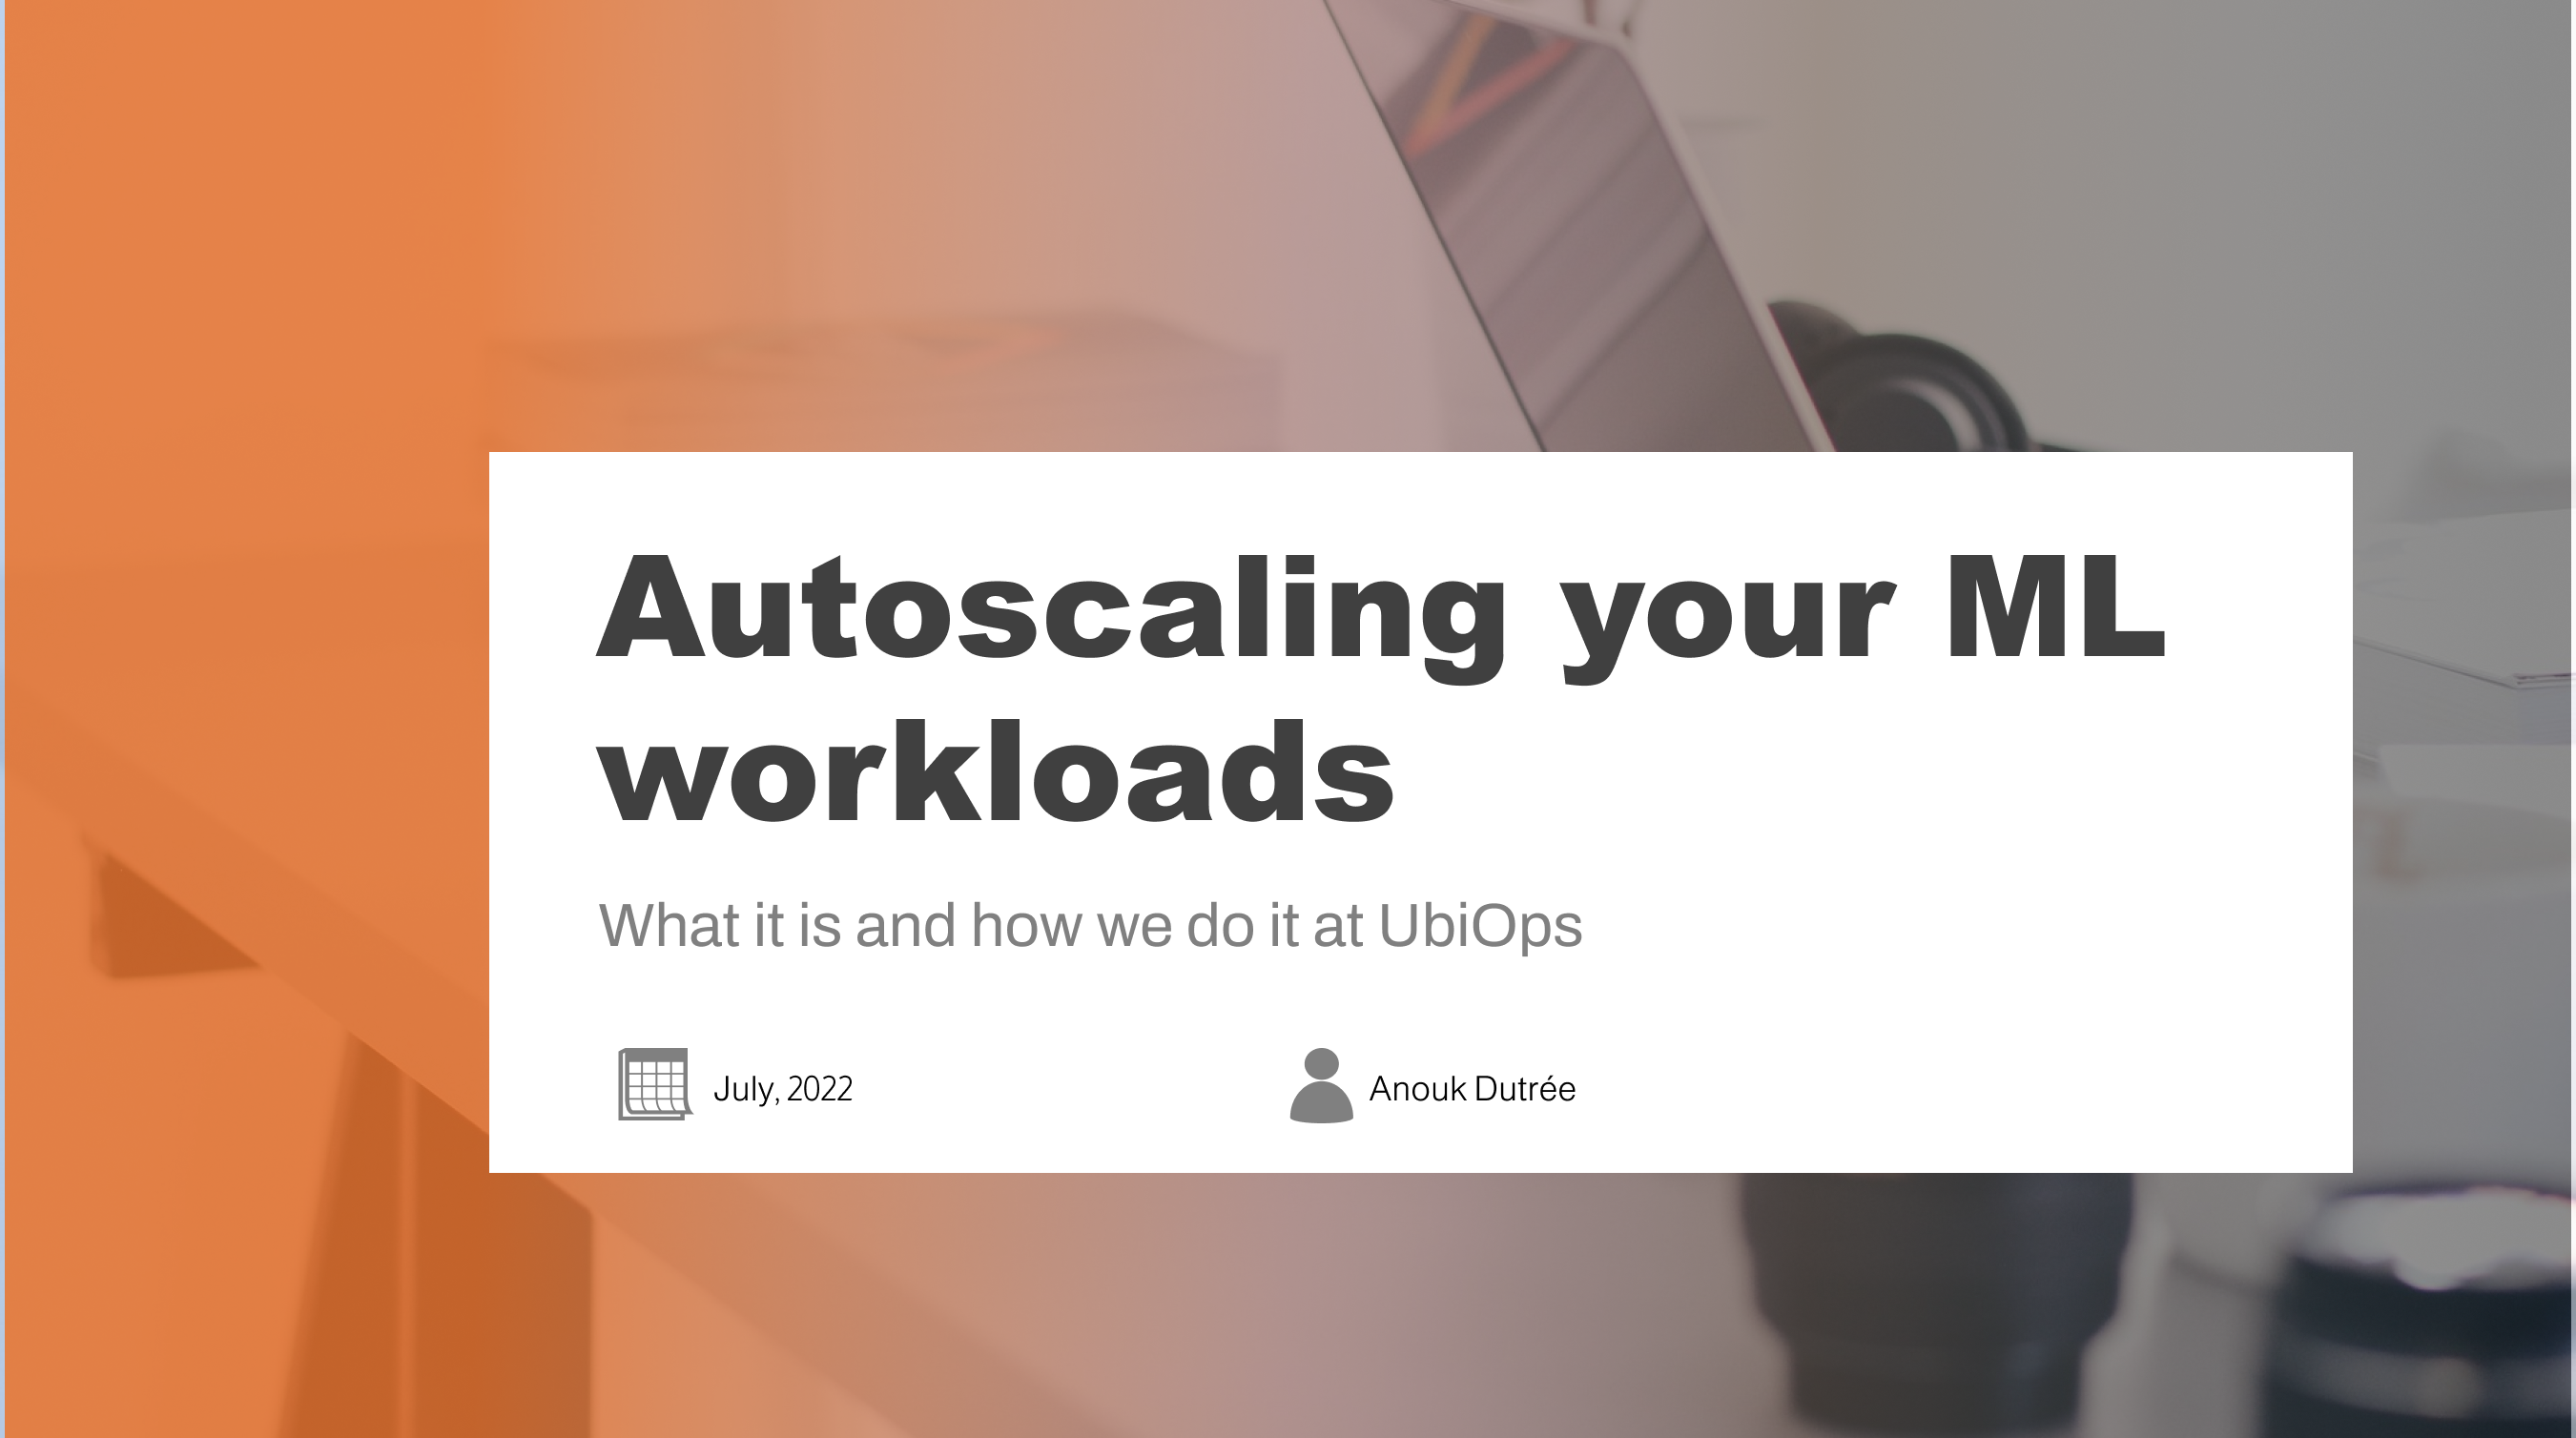 Autoscaling your ML workloads